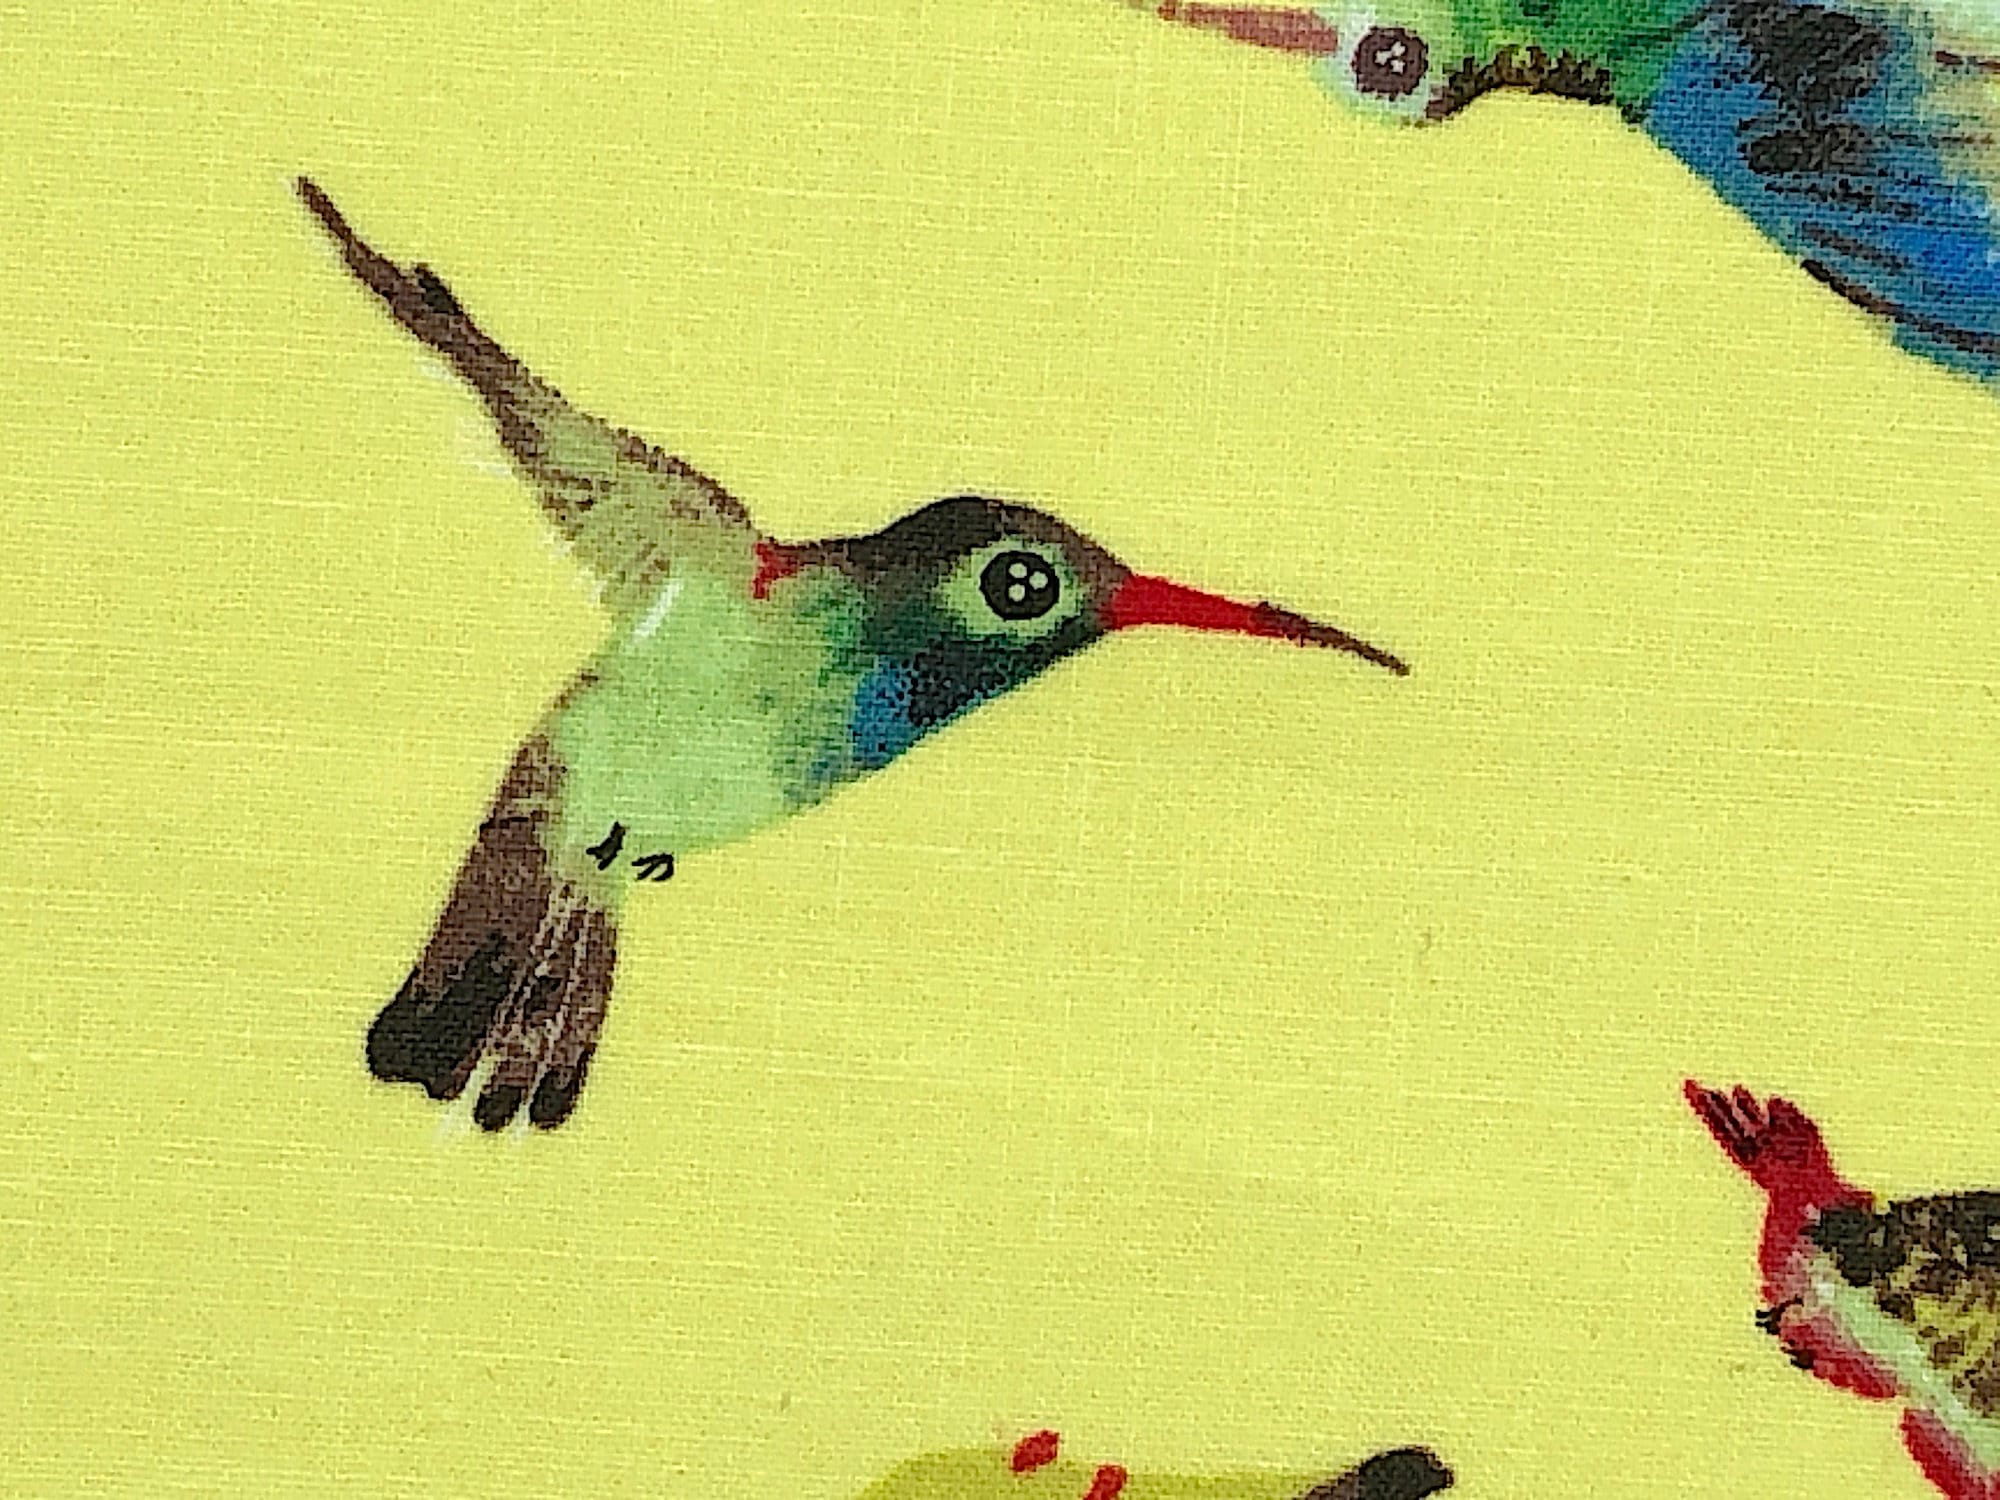 Close up of a hummingbird on a yellow background.